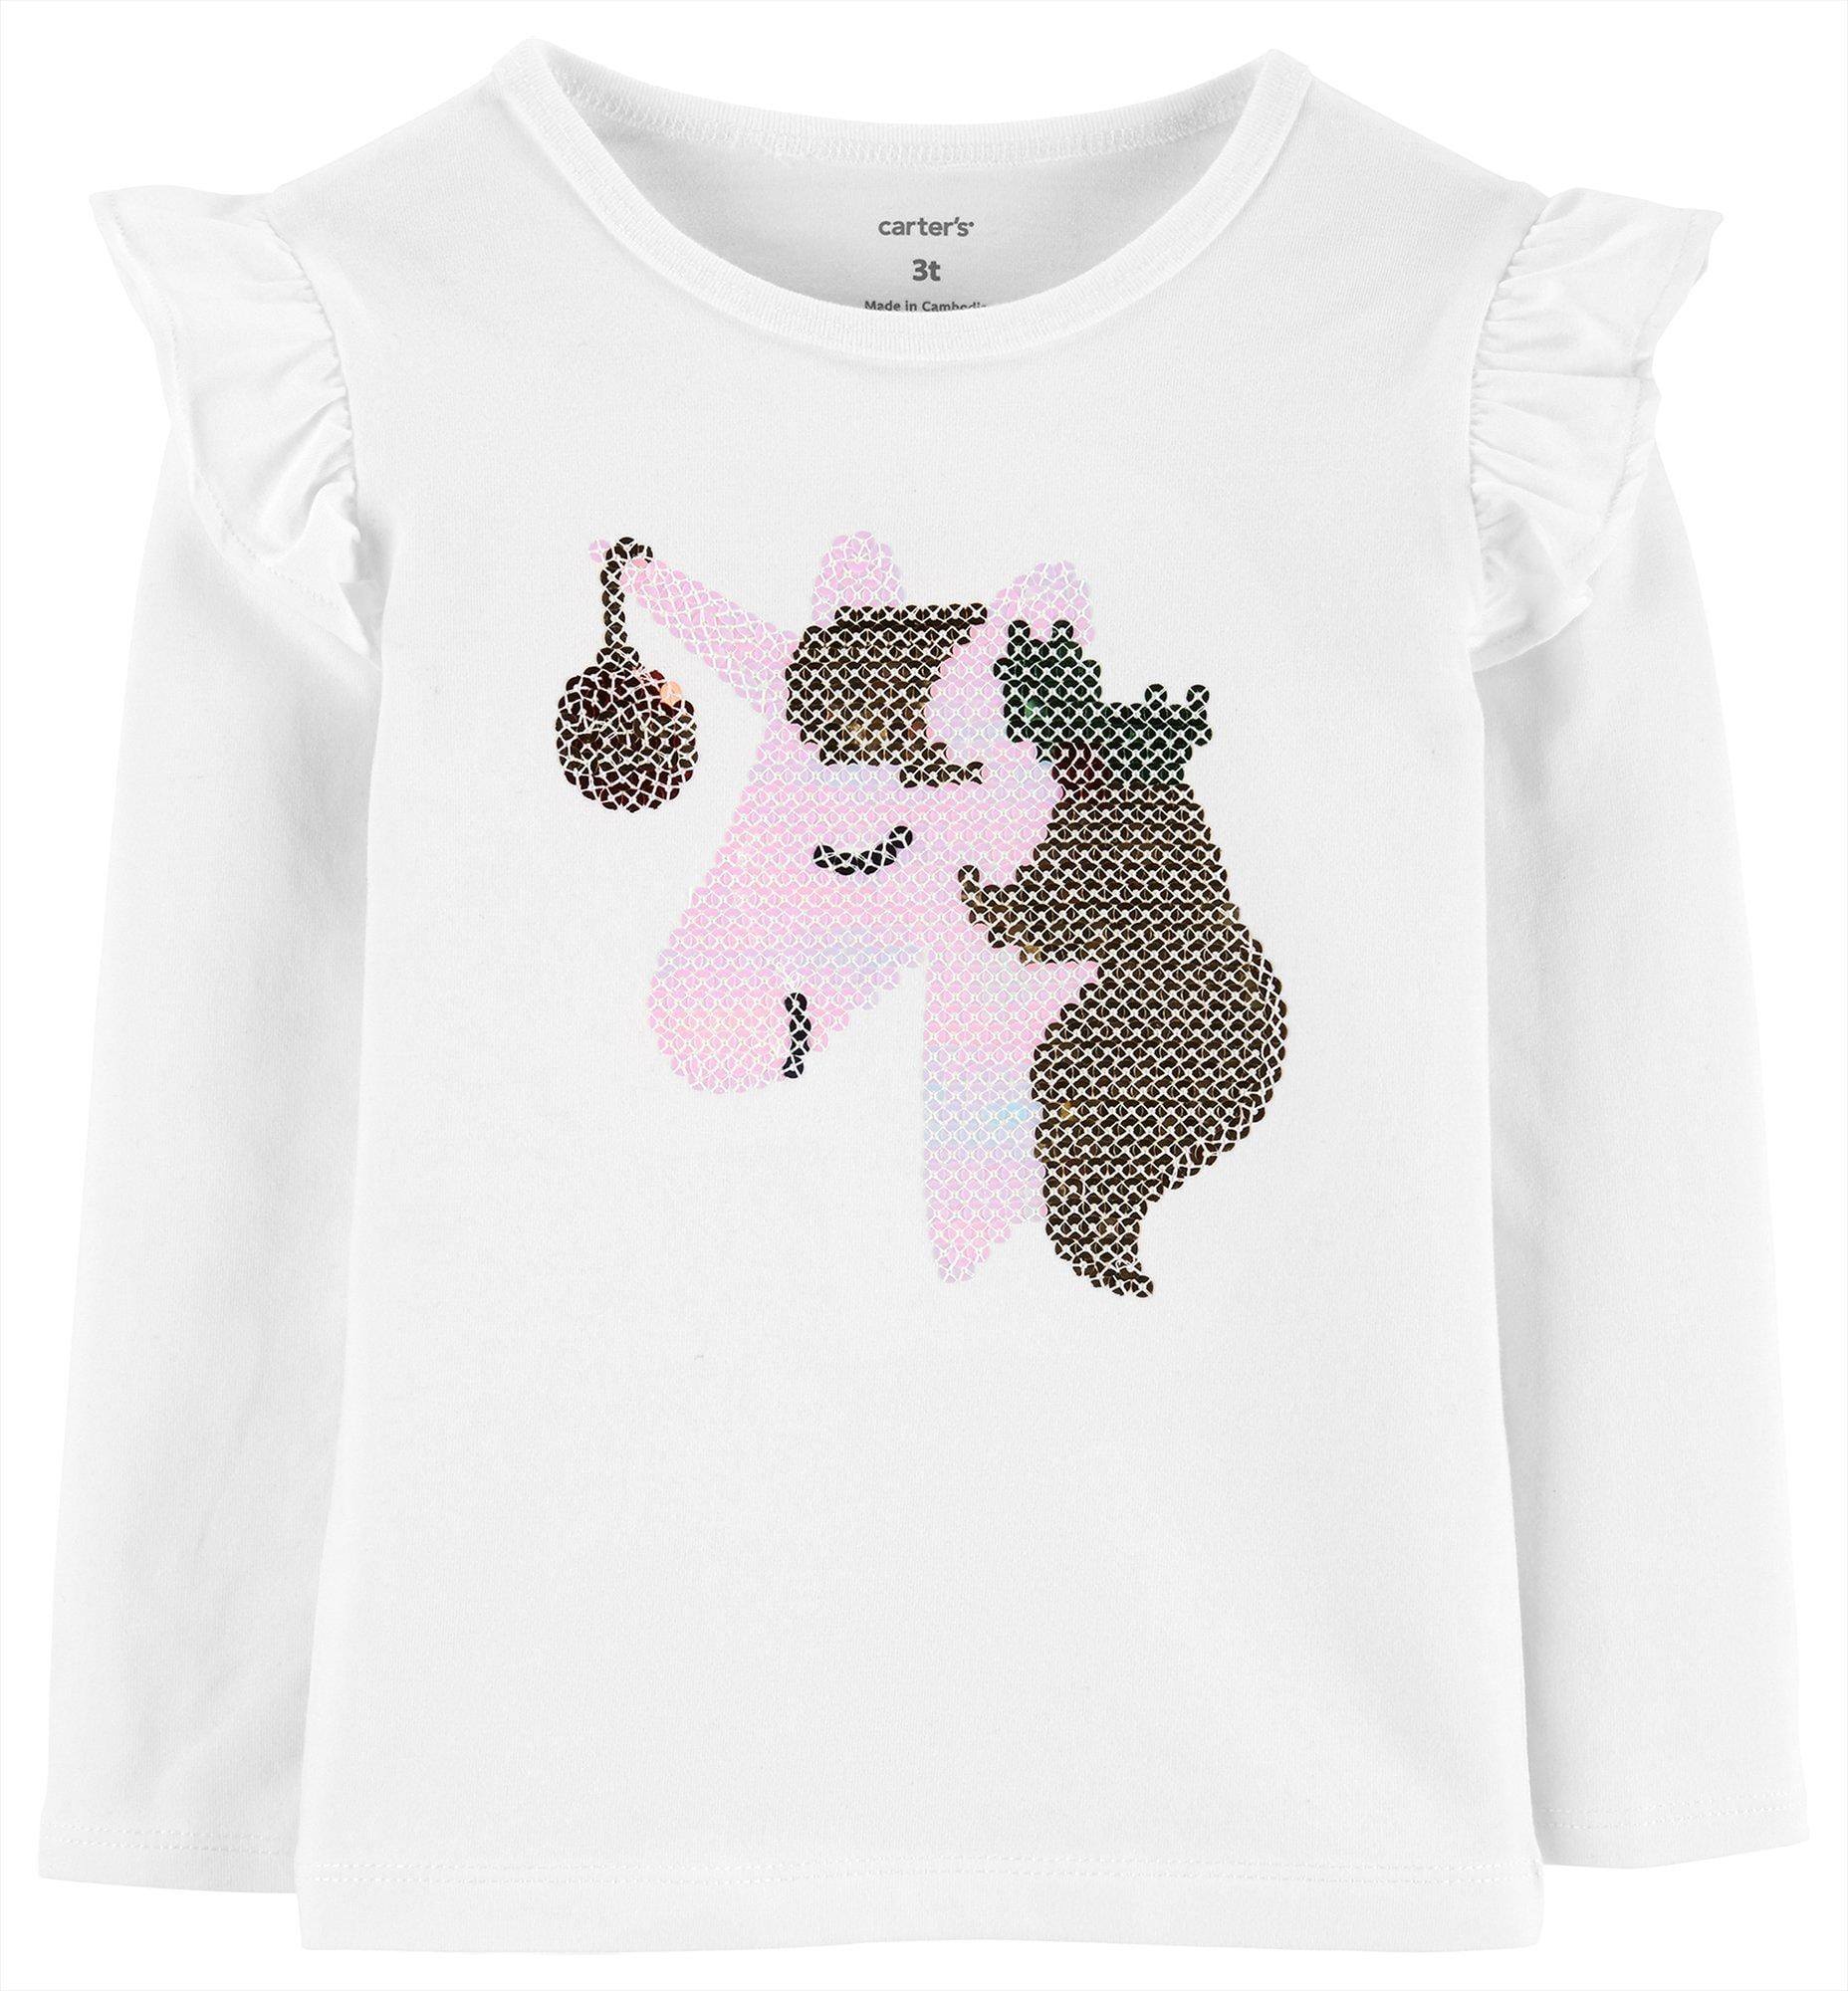 Details about   Carter's Girls Long Sleeve Pink Unicorn Top 2T or 4T 